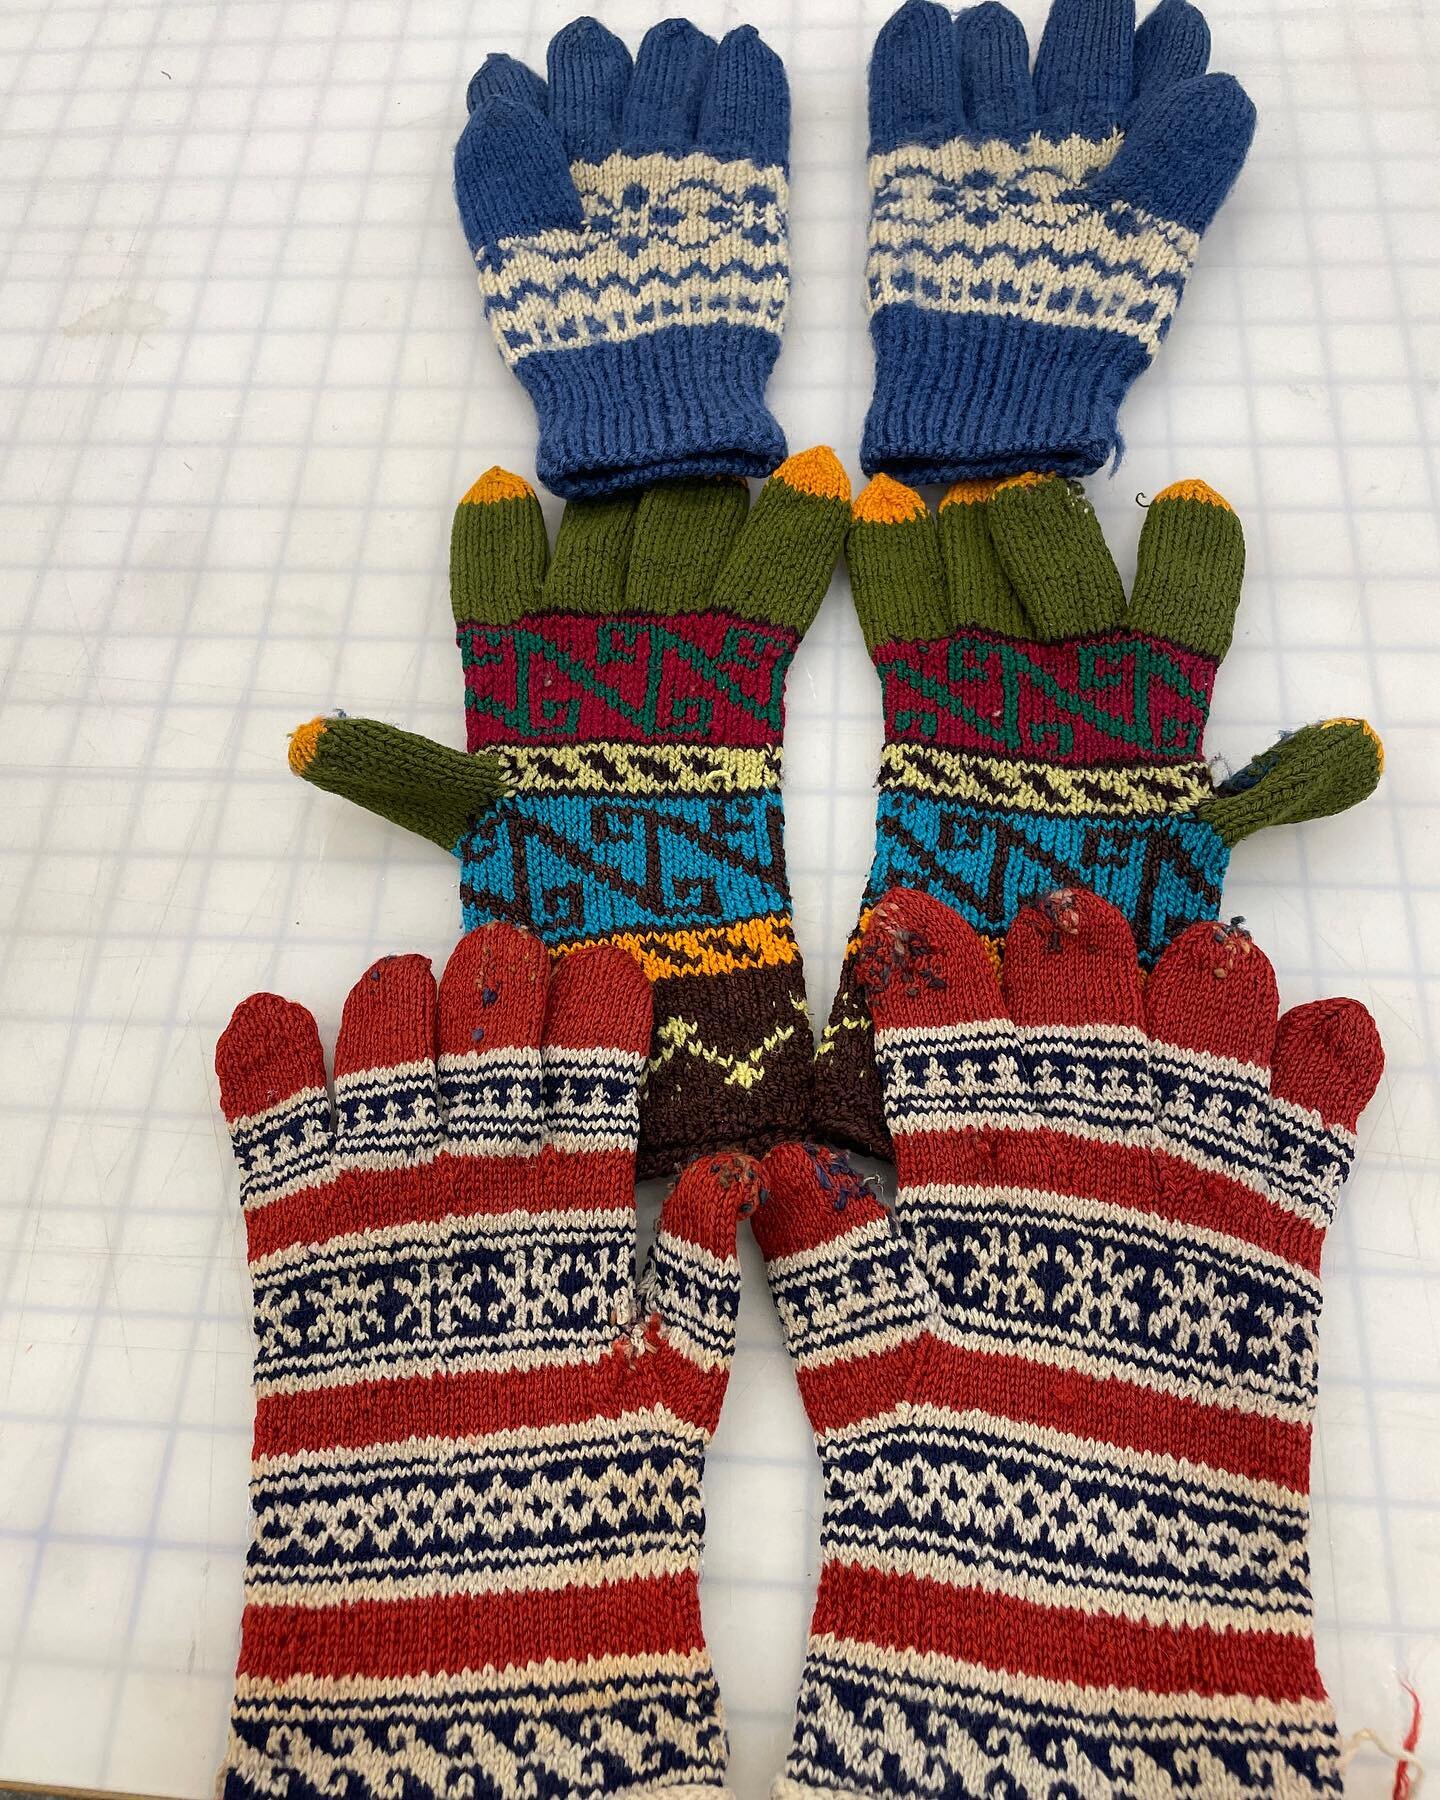 The prompt is &ldquo;me&rdquo; for day one of this year&rsquo;s MendMarch. I have been in love with handmade things my whole life. Here is a glove/love story that started 60 years ago and I am posting the repairs in honor of @visiblemend and #mendmar